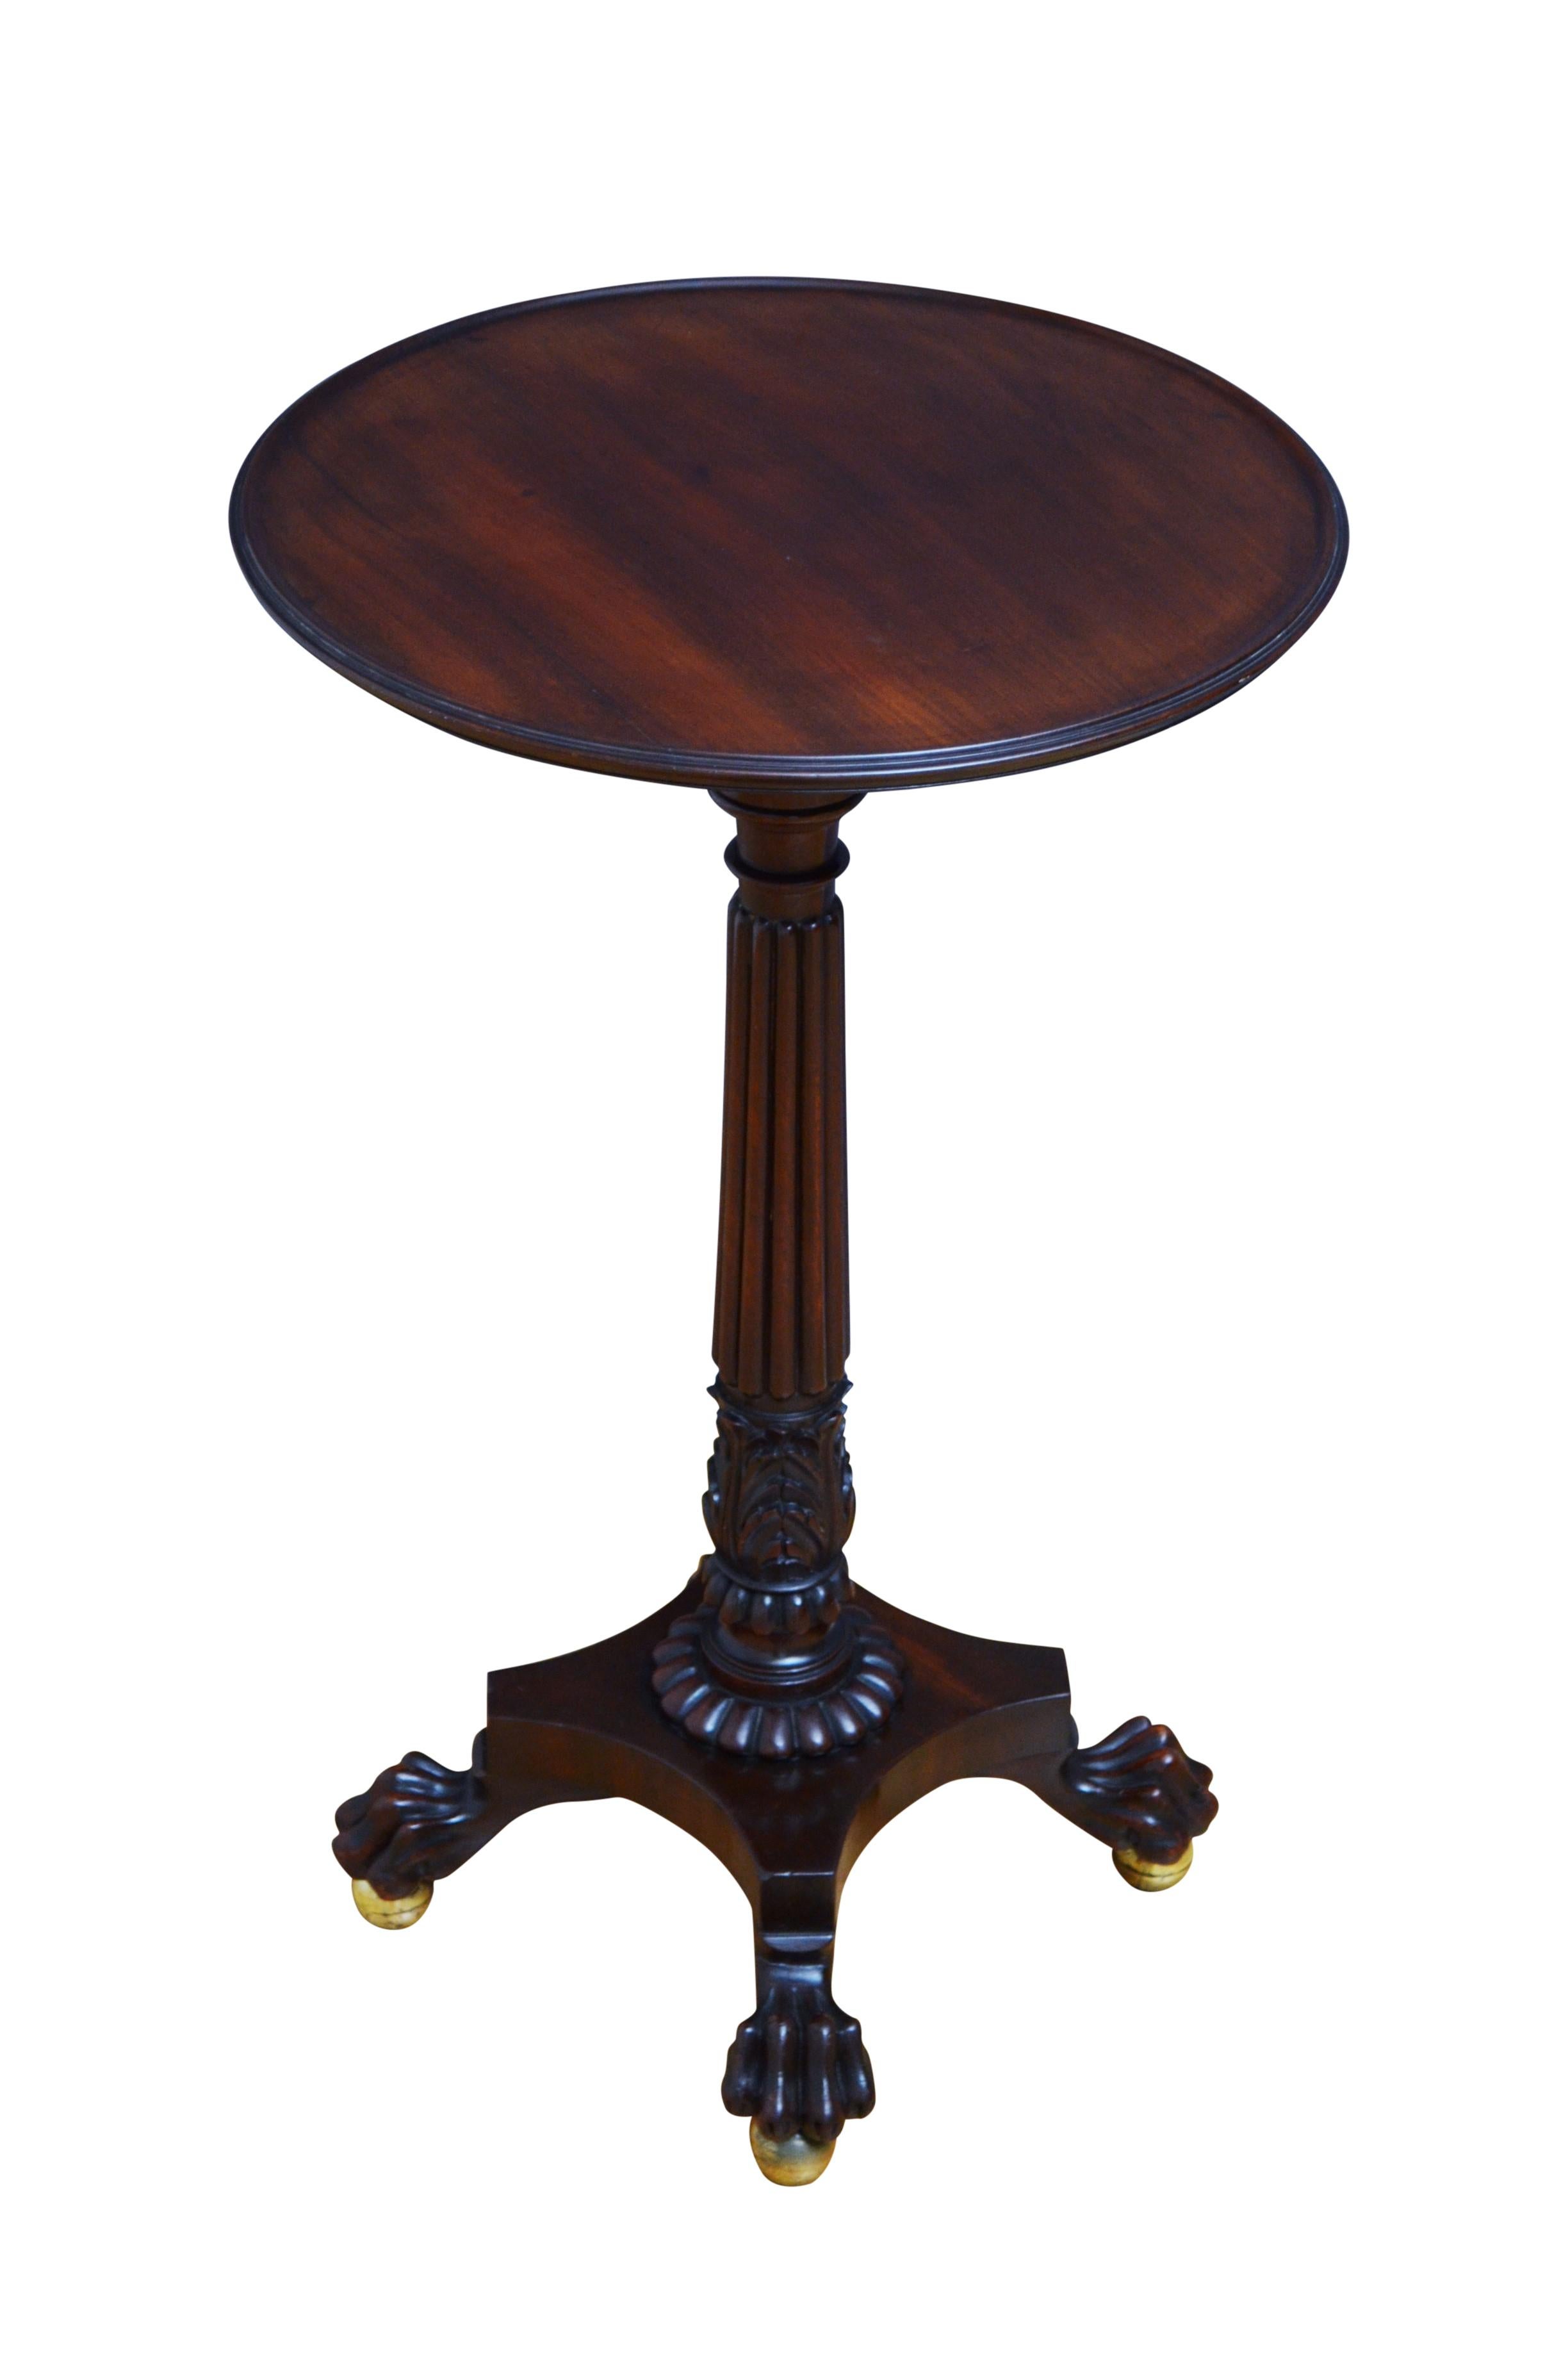 P0201 Superb Regency side or lamp table, having dished top in figured mahogany, standing on slender, fluted column with acanthus carved capital and petal carved collar terminating in quatrefoil base, paw feet and brass ball feet. This antique